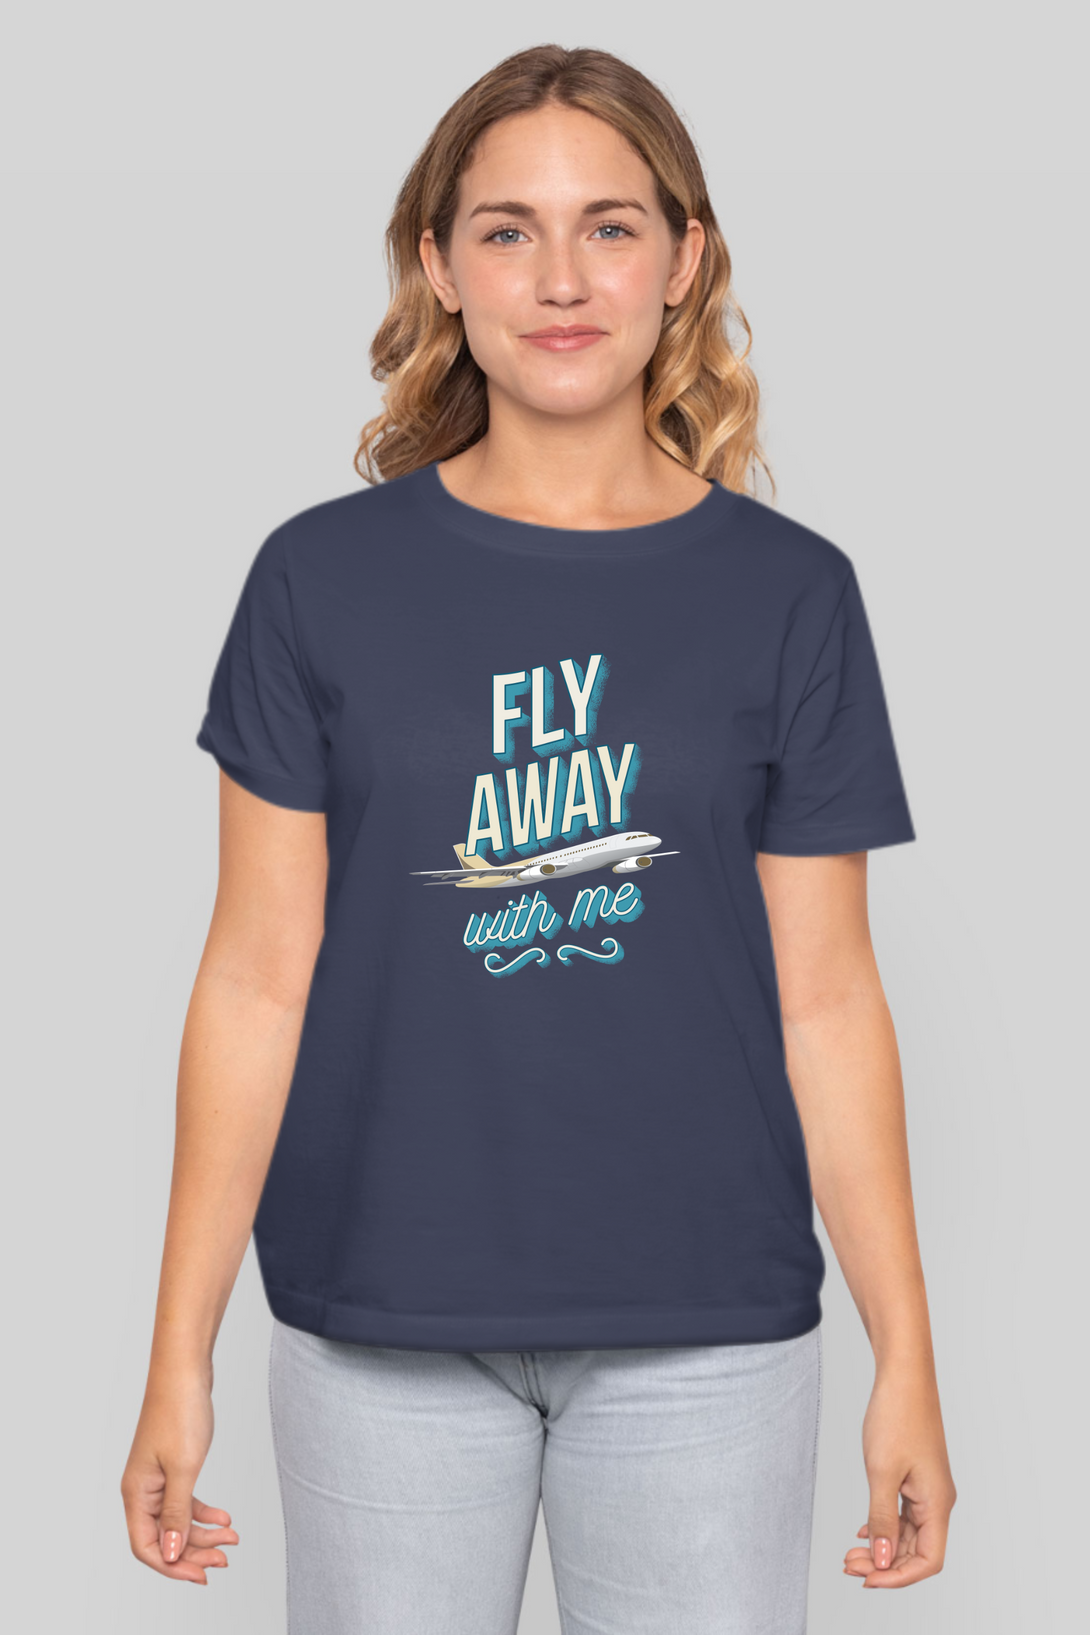 Fly Away With Me Printed T-Shirt For Women - WowWaves - 9